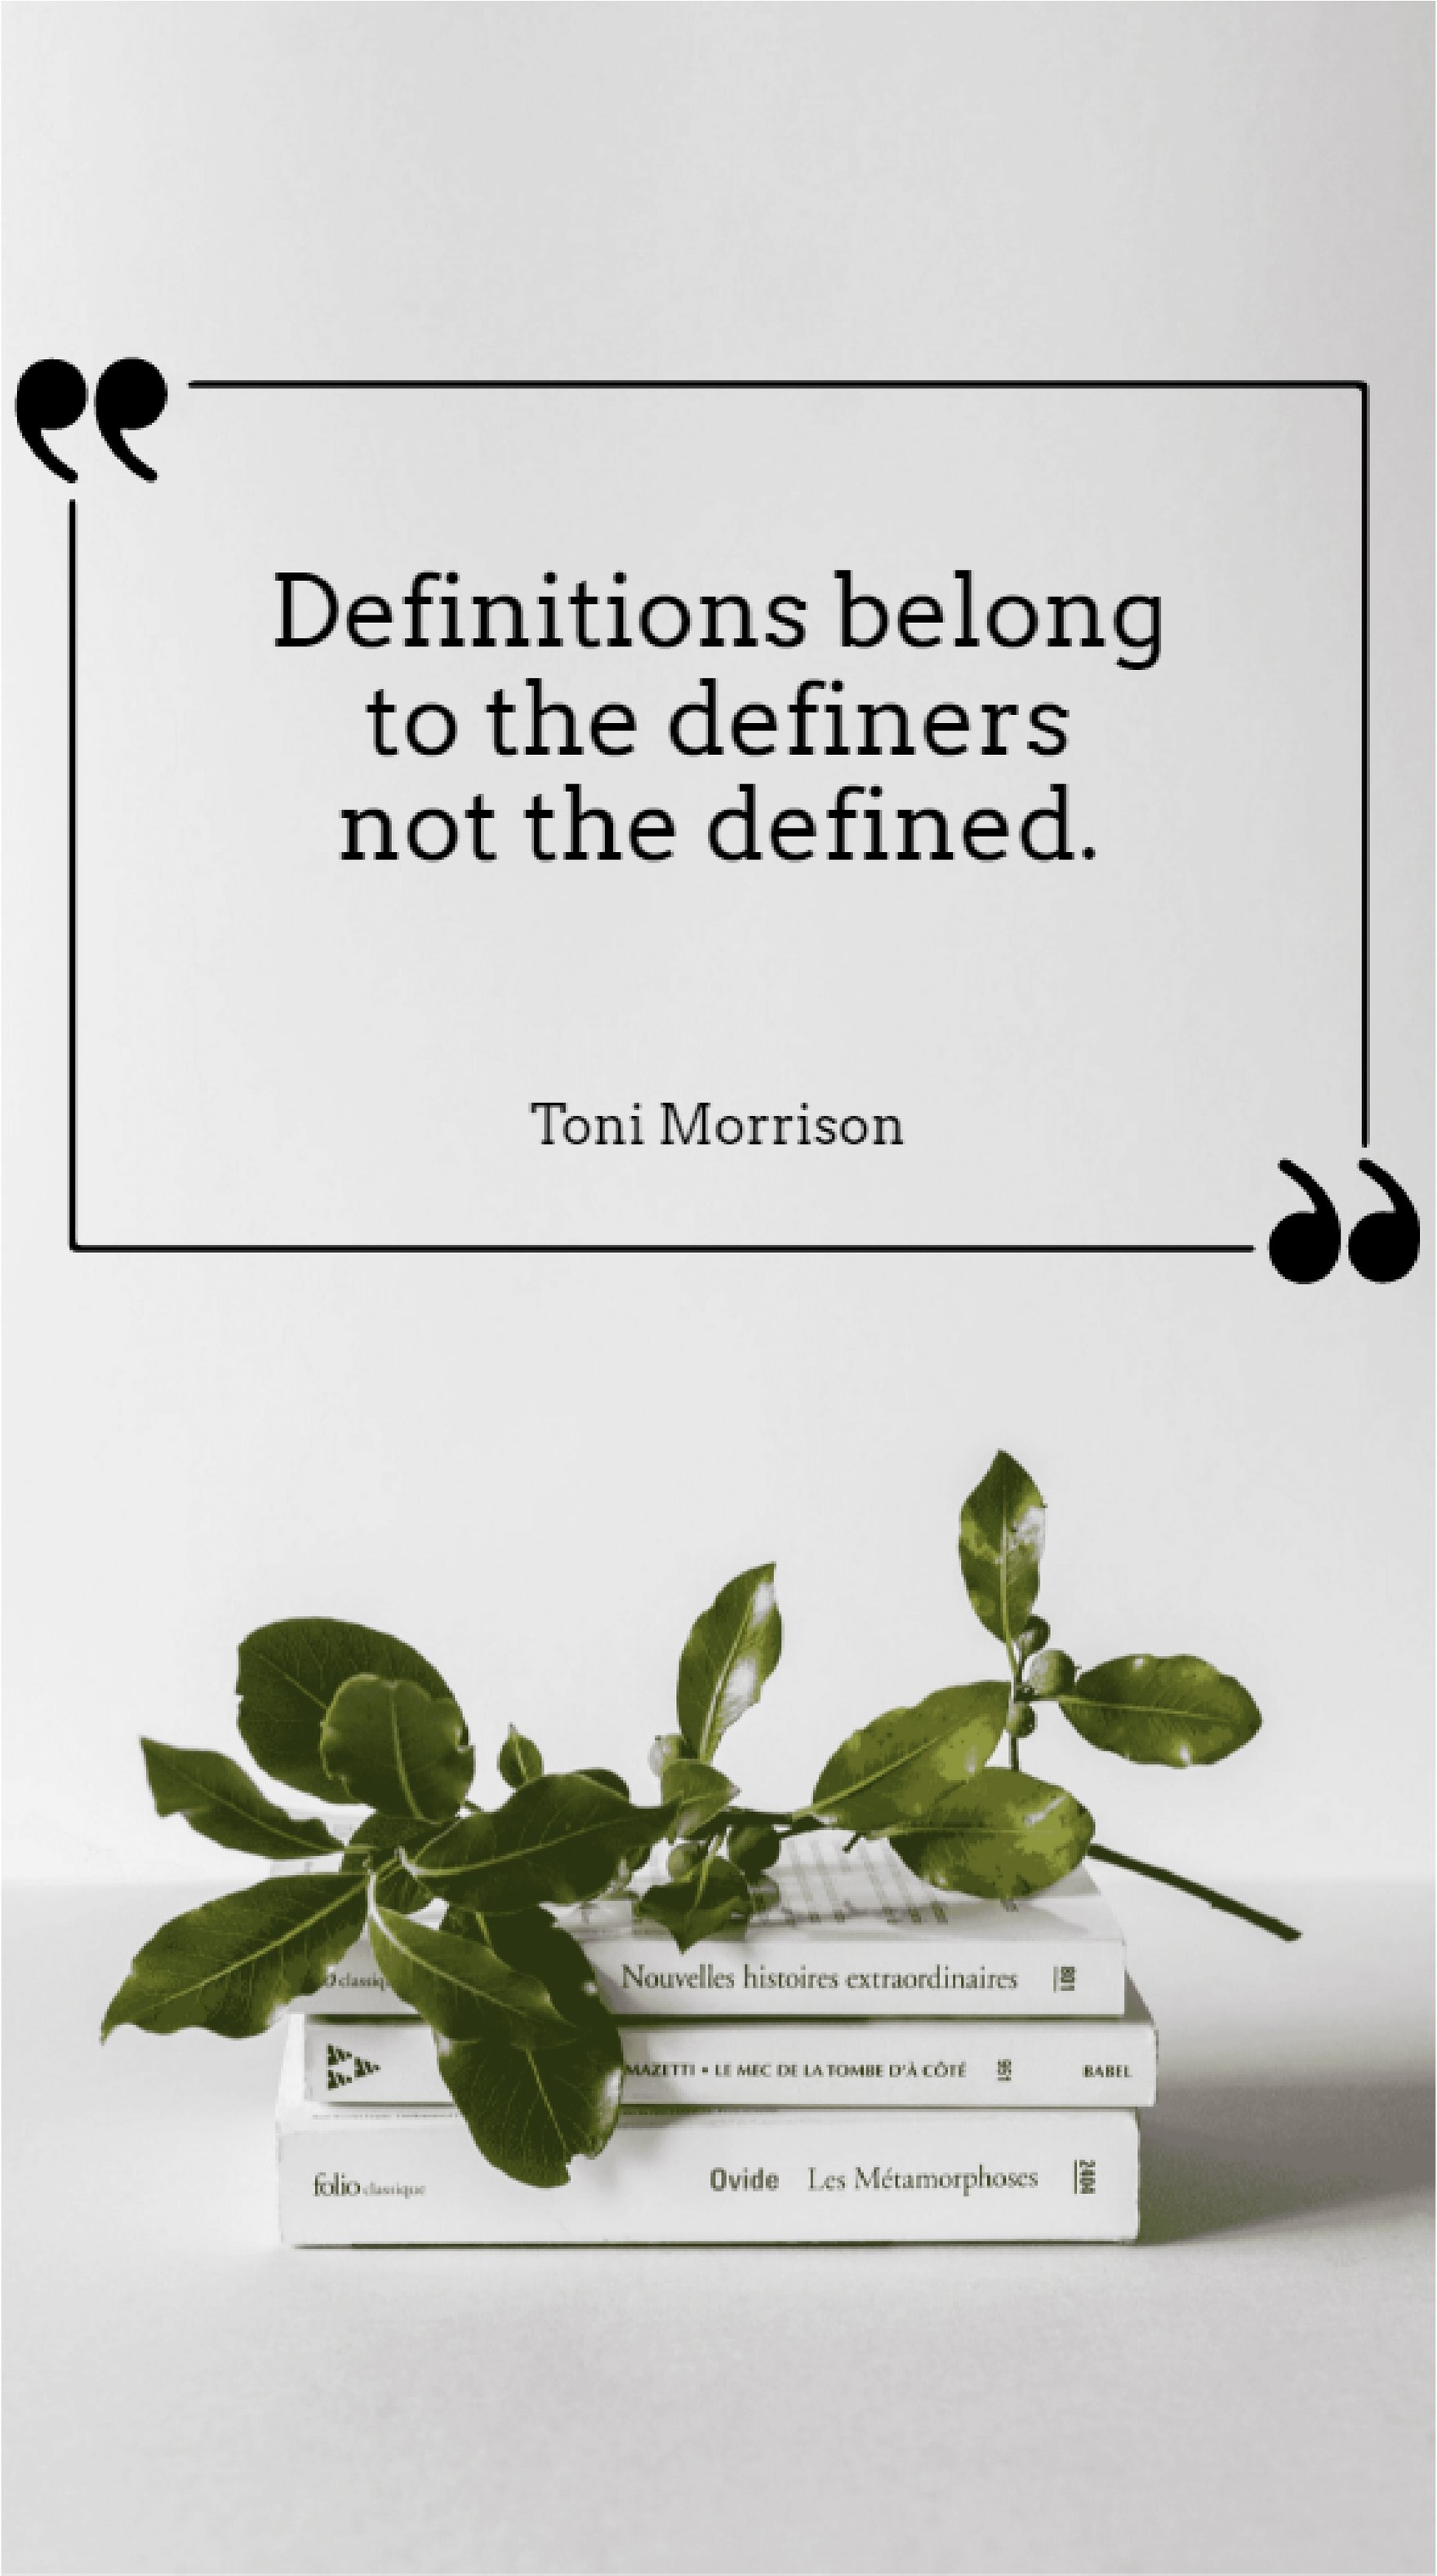 Toni Morrison - Definitions belong to the definers not the defined.